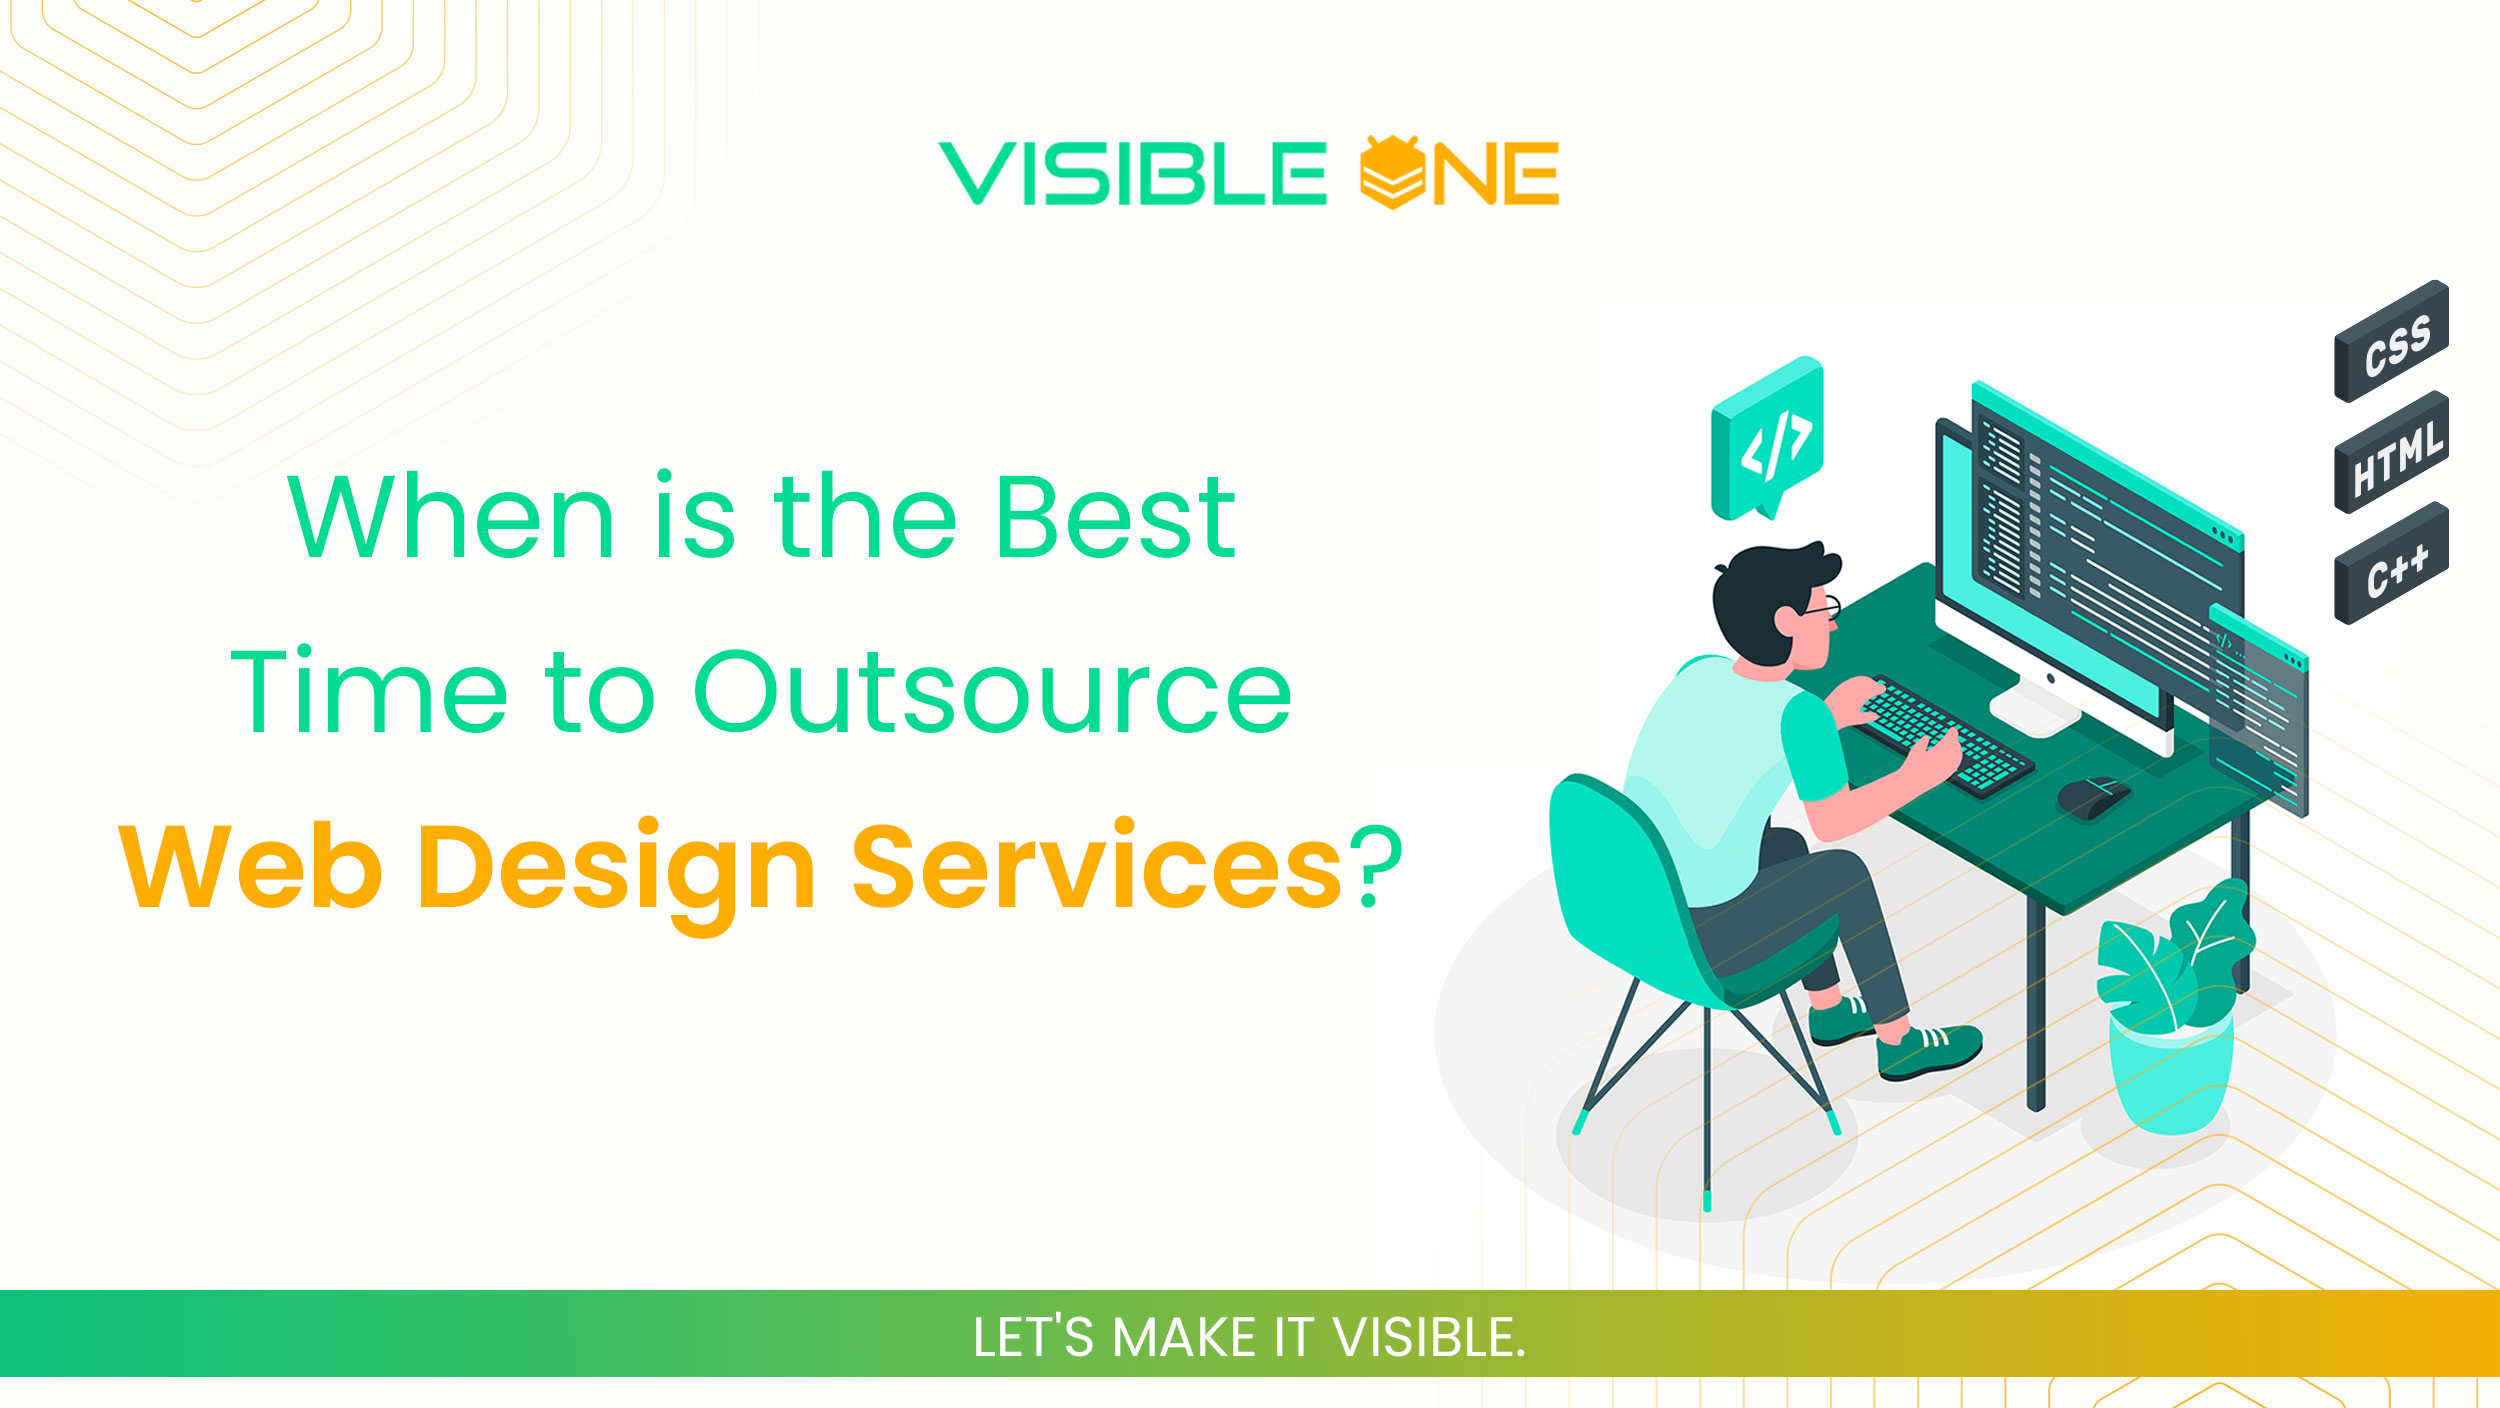 When is the Best Time to Outsource Web Design Services?